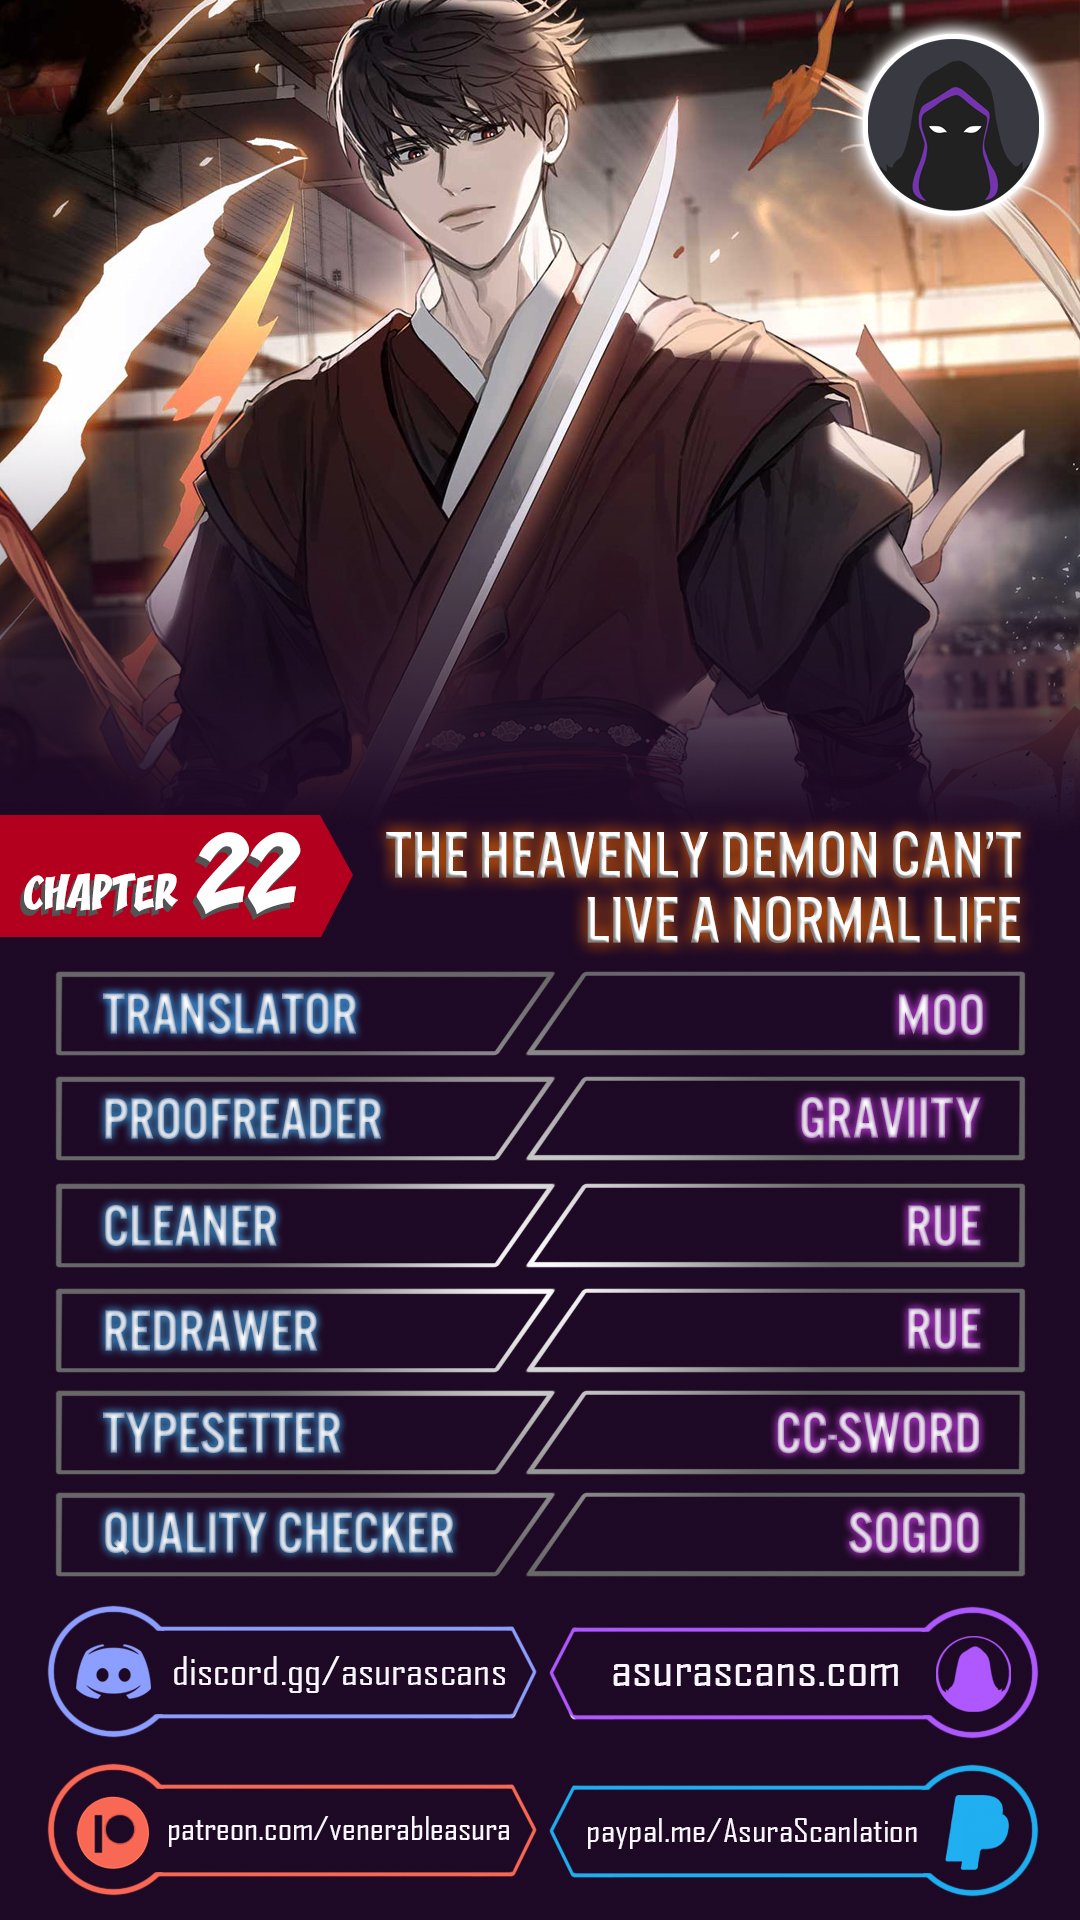 The Heavenly Demon Can't Live a Normal Life - Chapter 24256 - Image 1